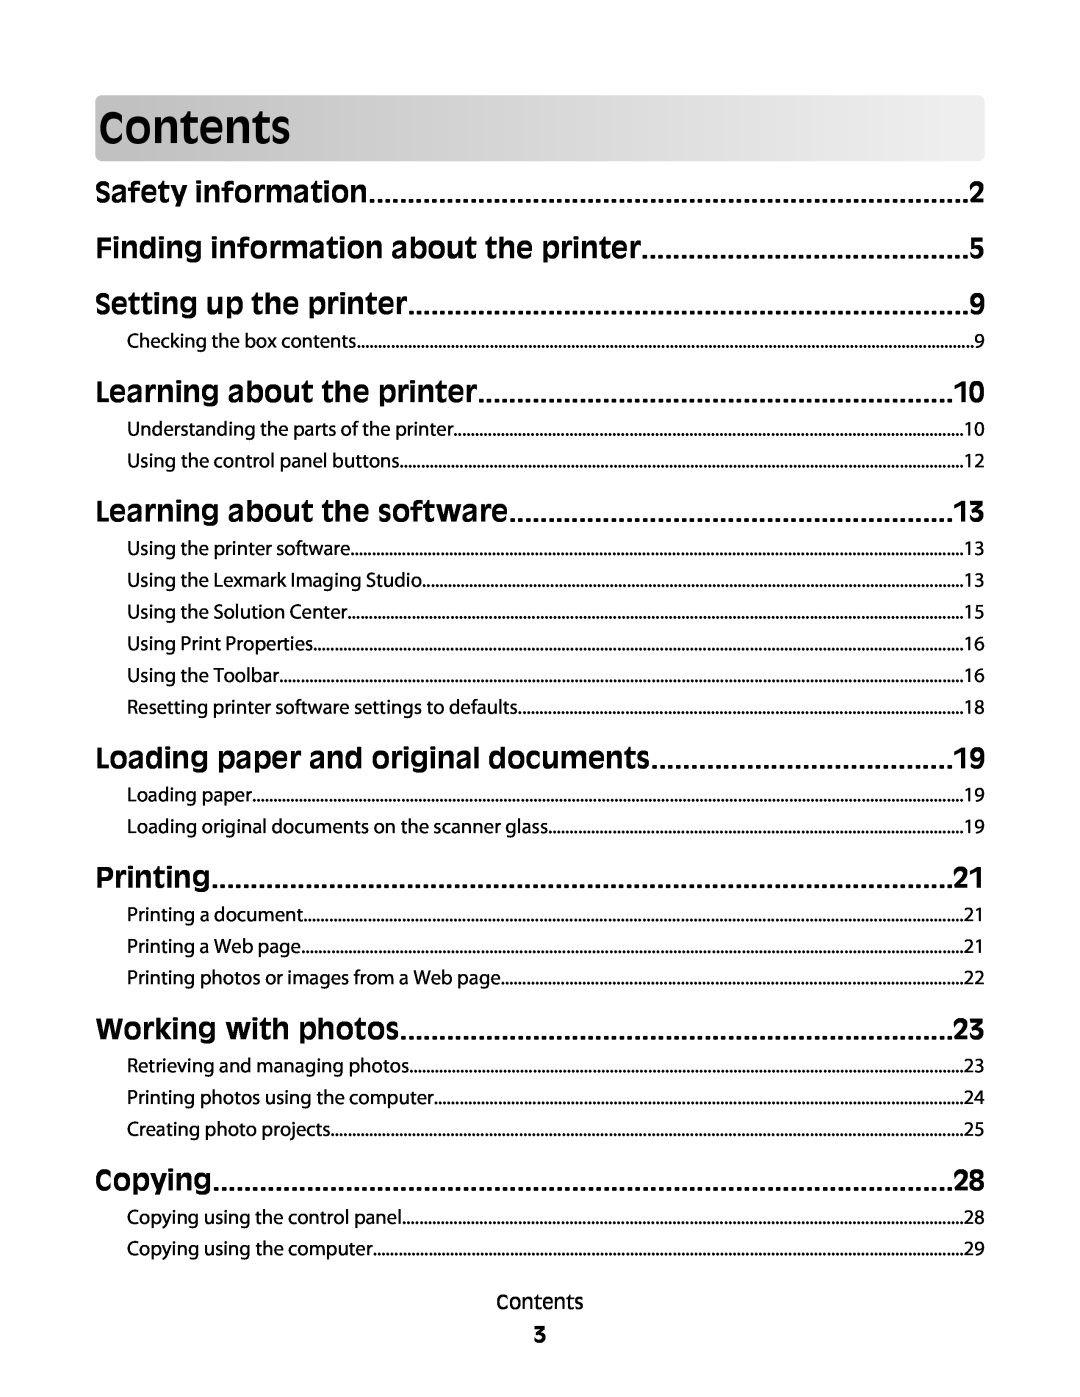 Lexmark 2500 Series Contents, Safety information, Finding information about the printer, Setting up the printer, Printing 